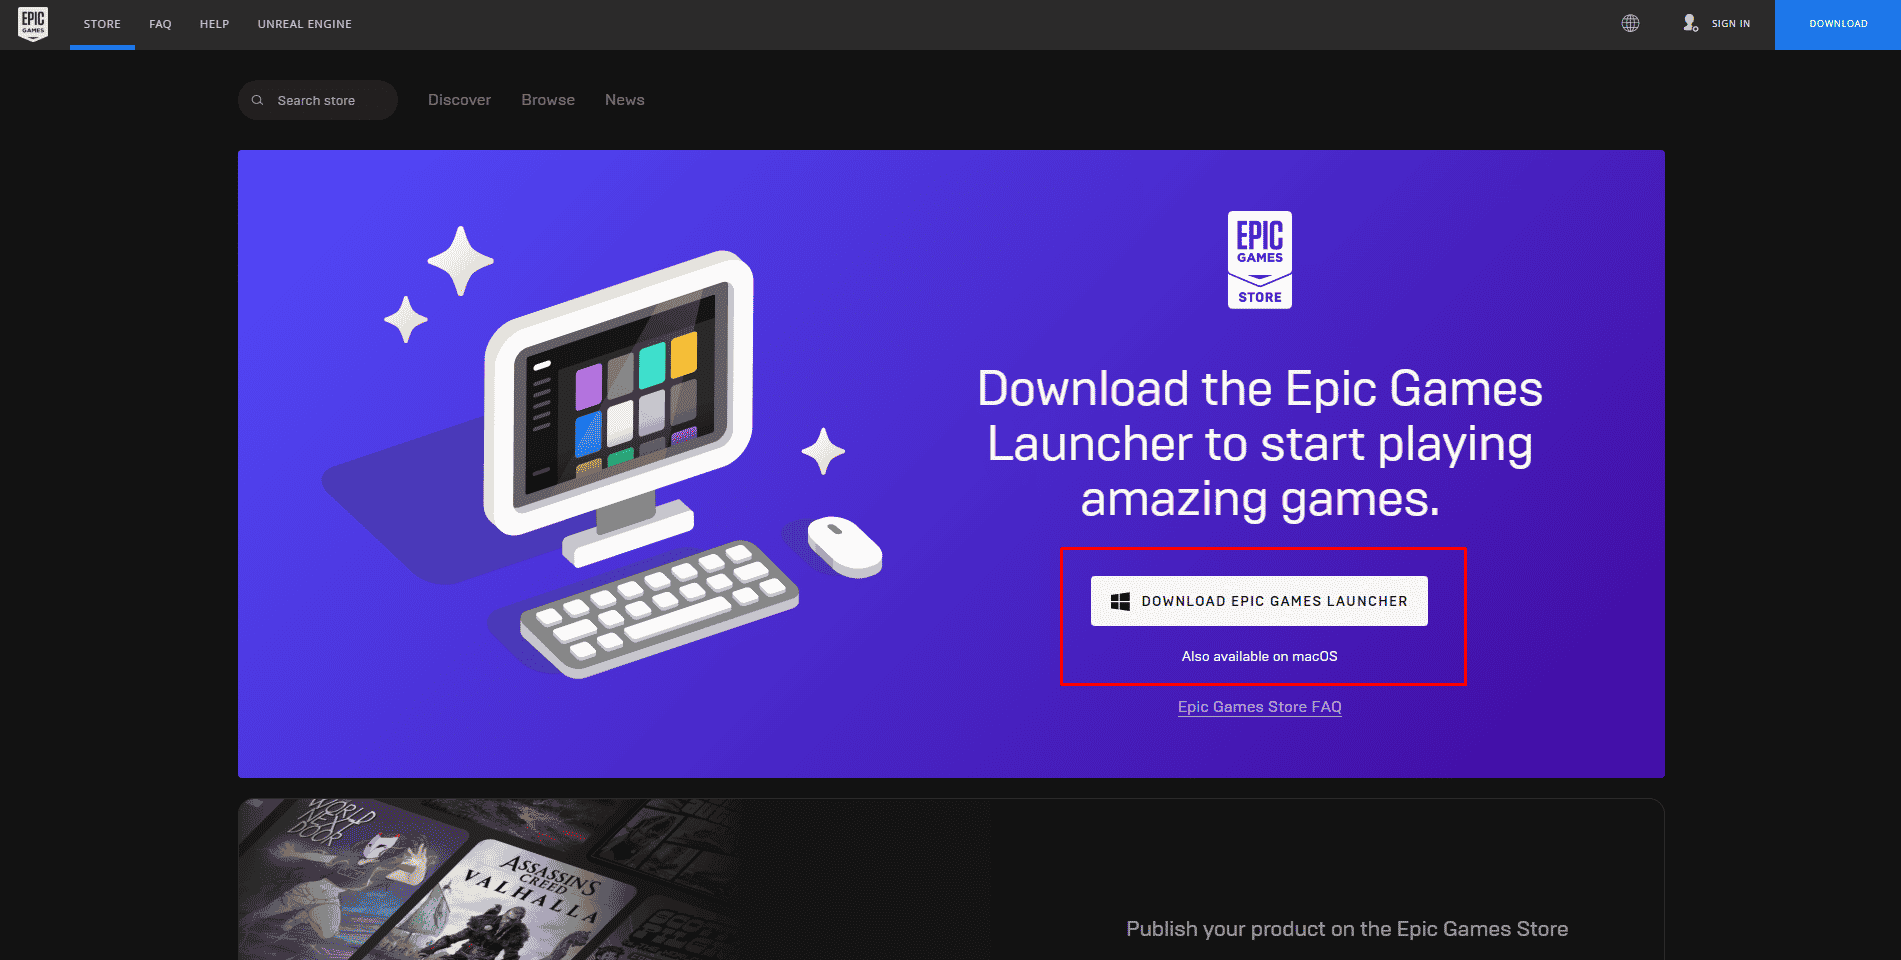 Click on DOWNLOAD EPIC GAMES LAUNCHER to download